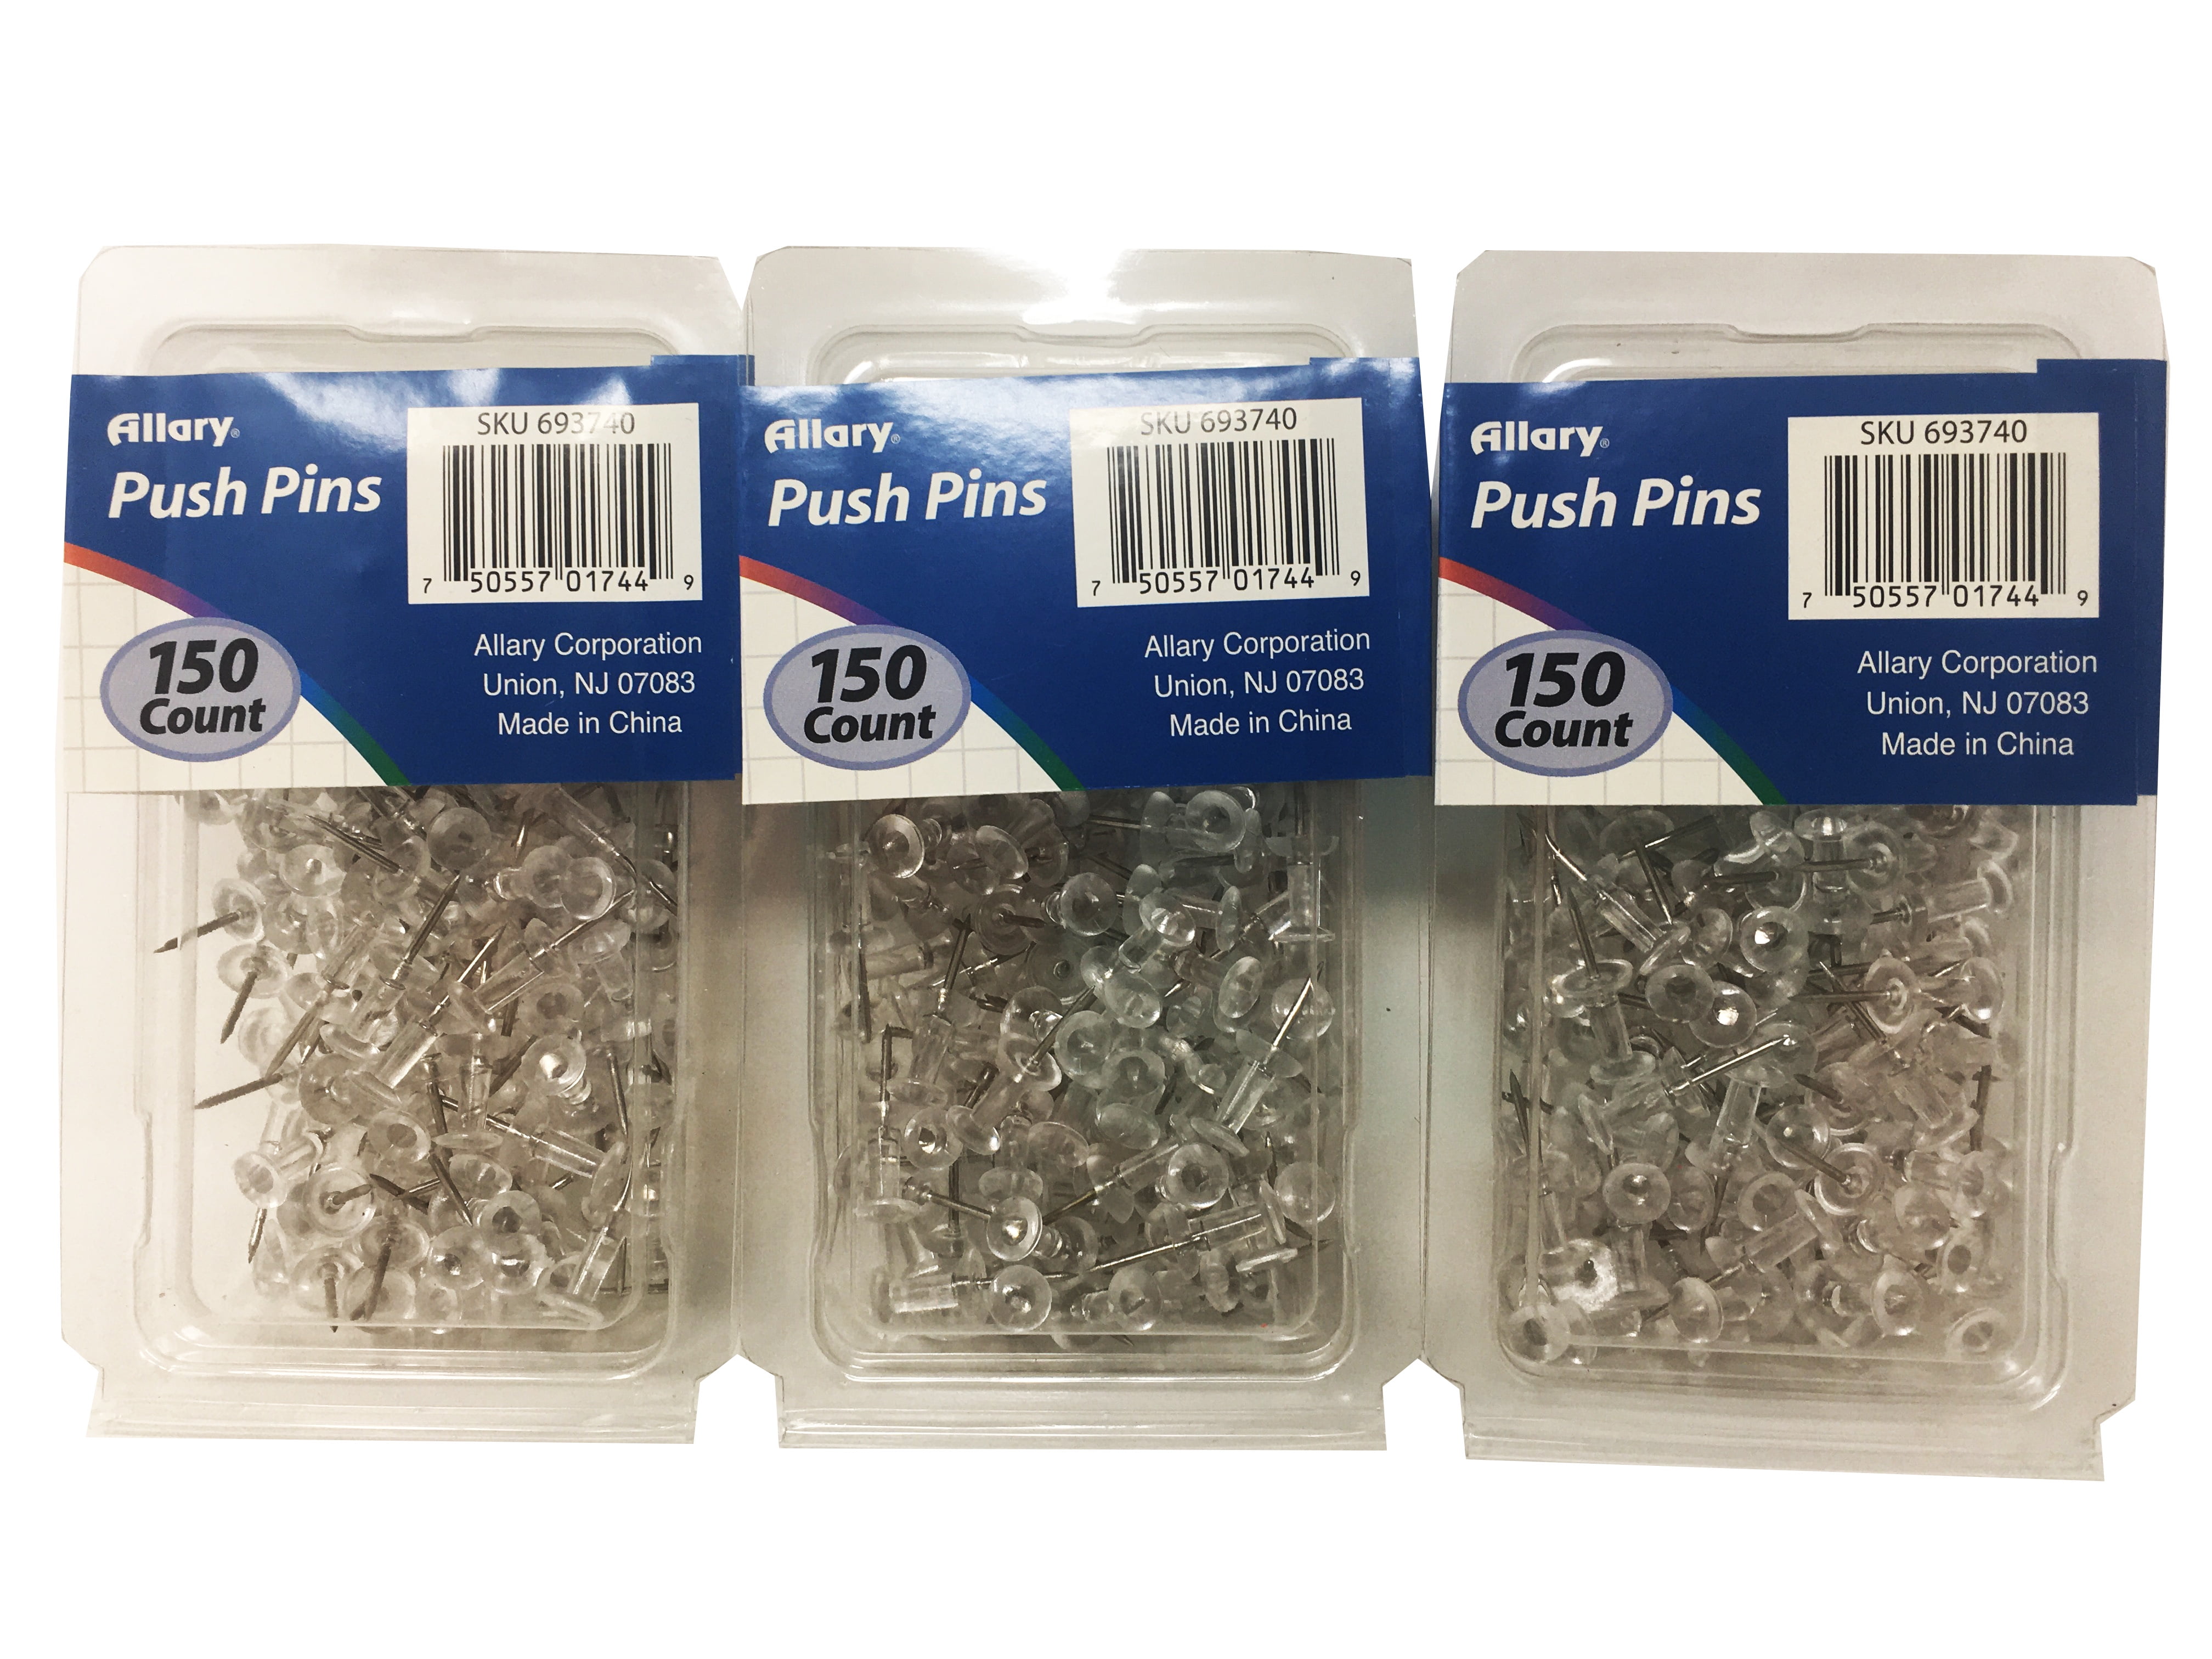 Juvale 400-Count Safety Pins - Large Safety Pins for Garment